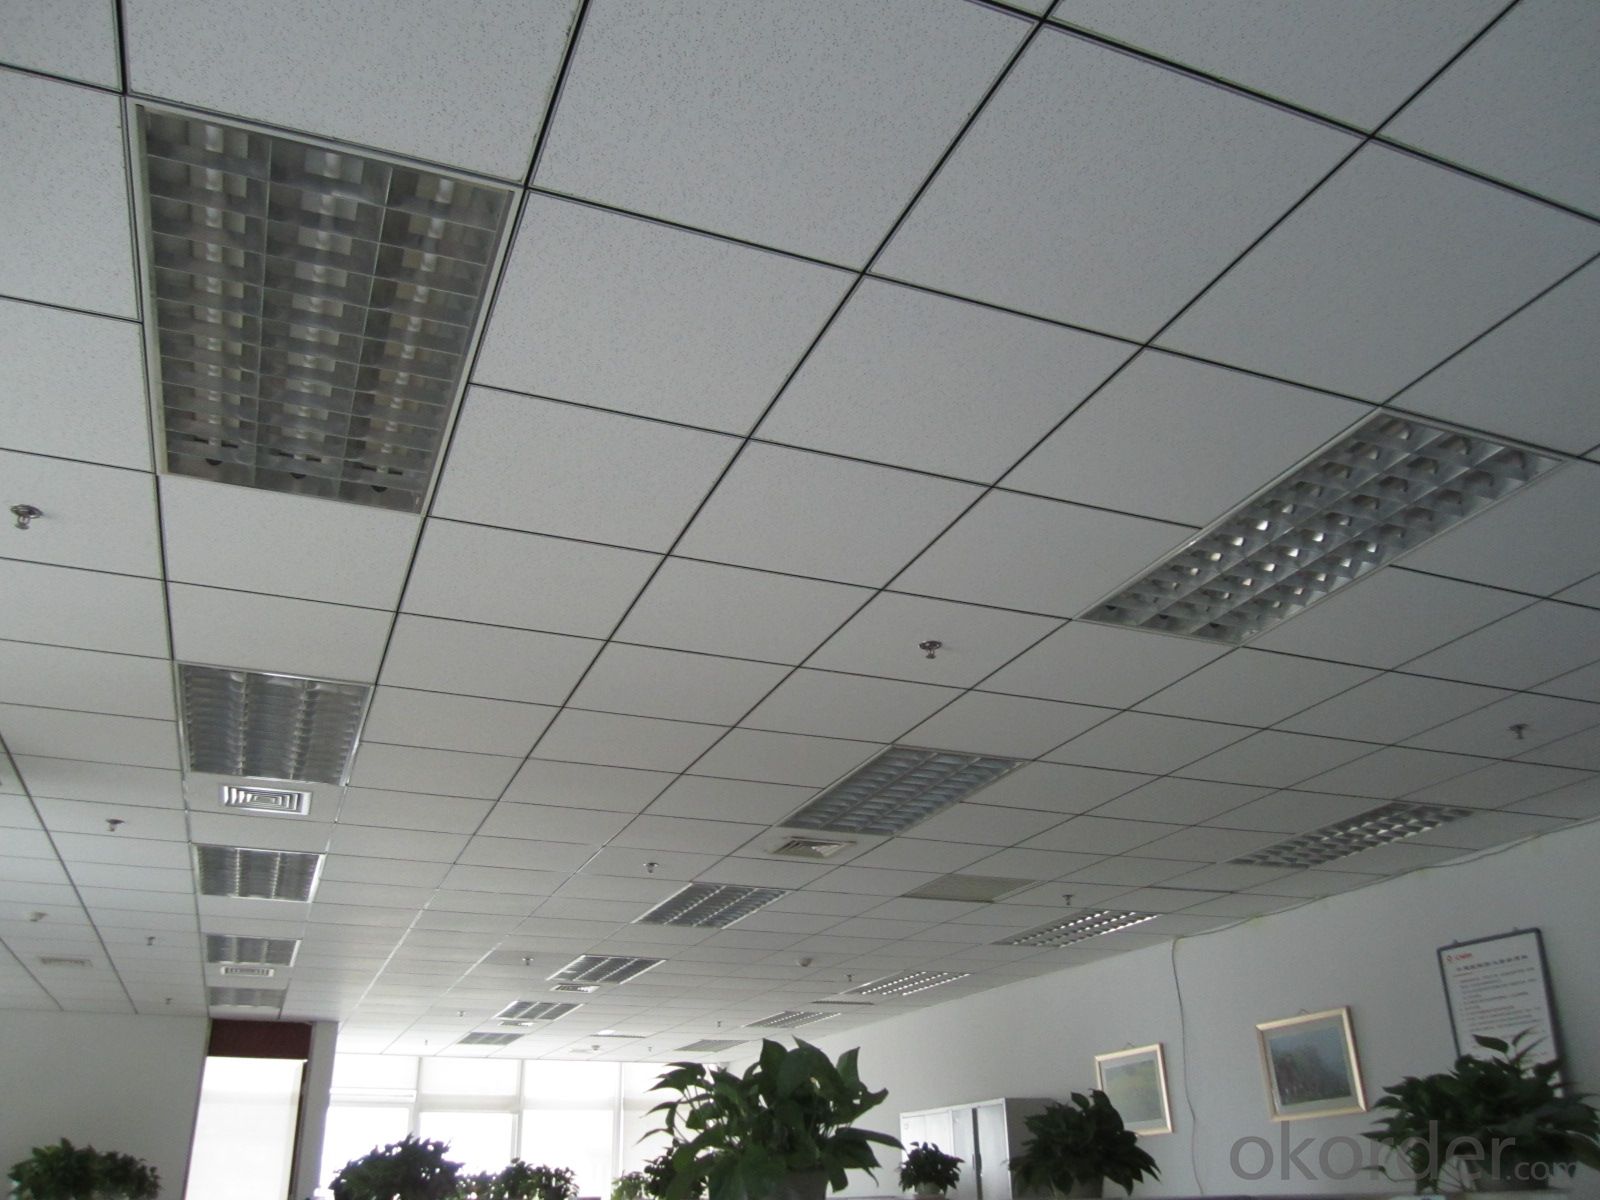 Mineral Fiber Ceiling in Size 595*595*14mm